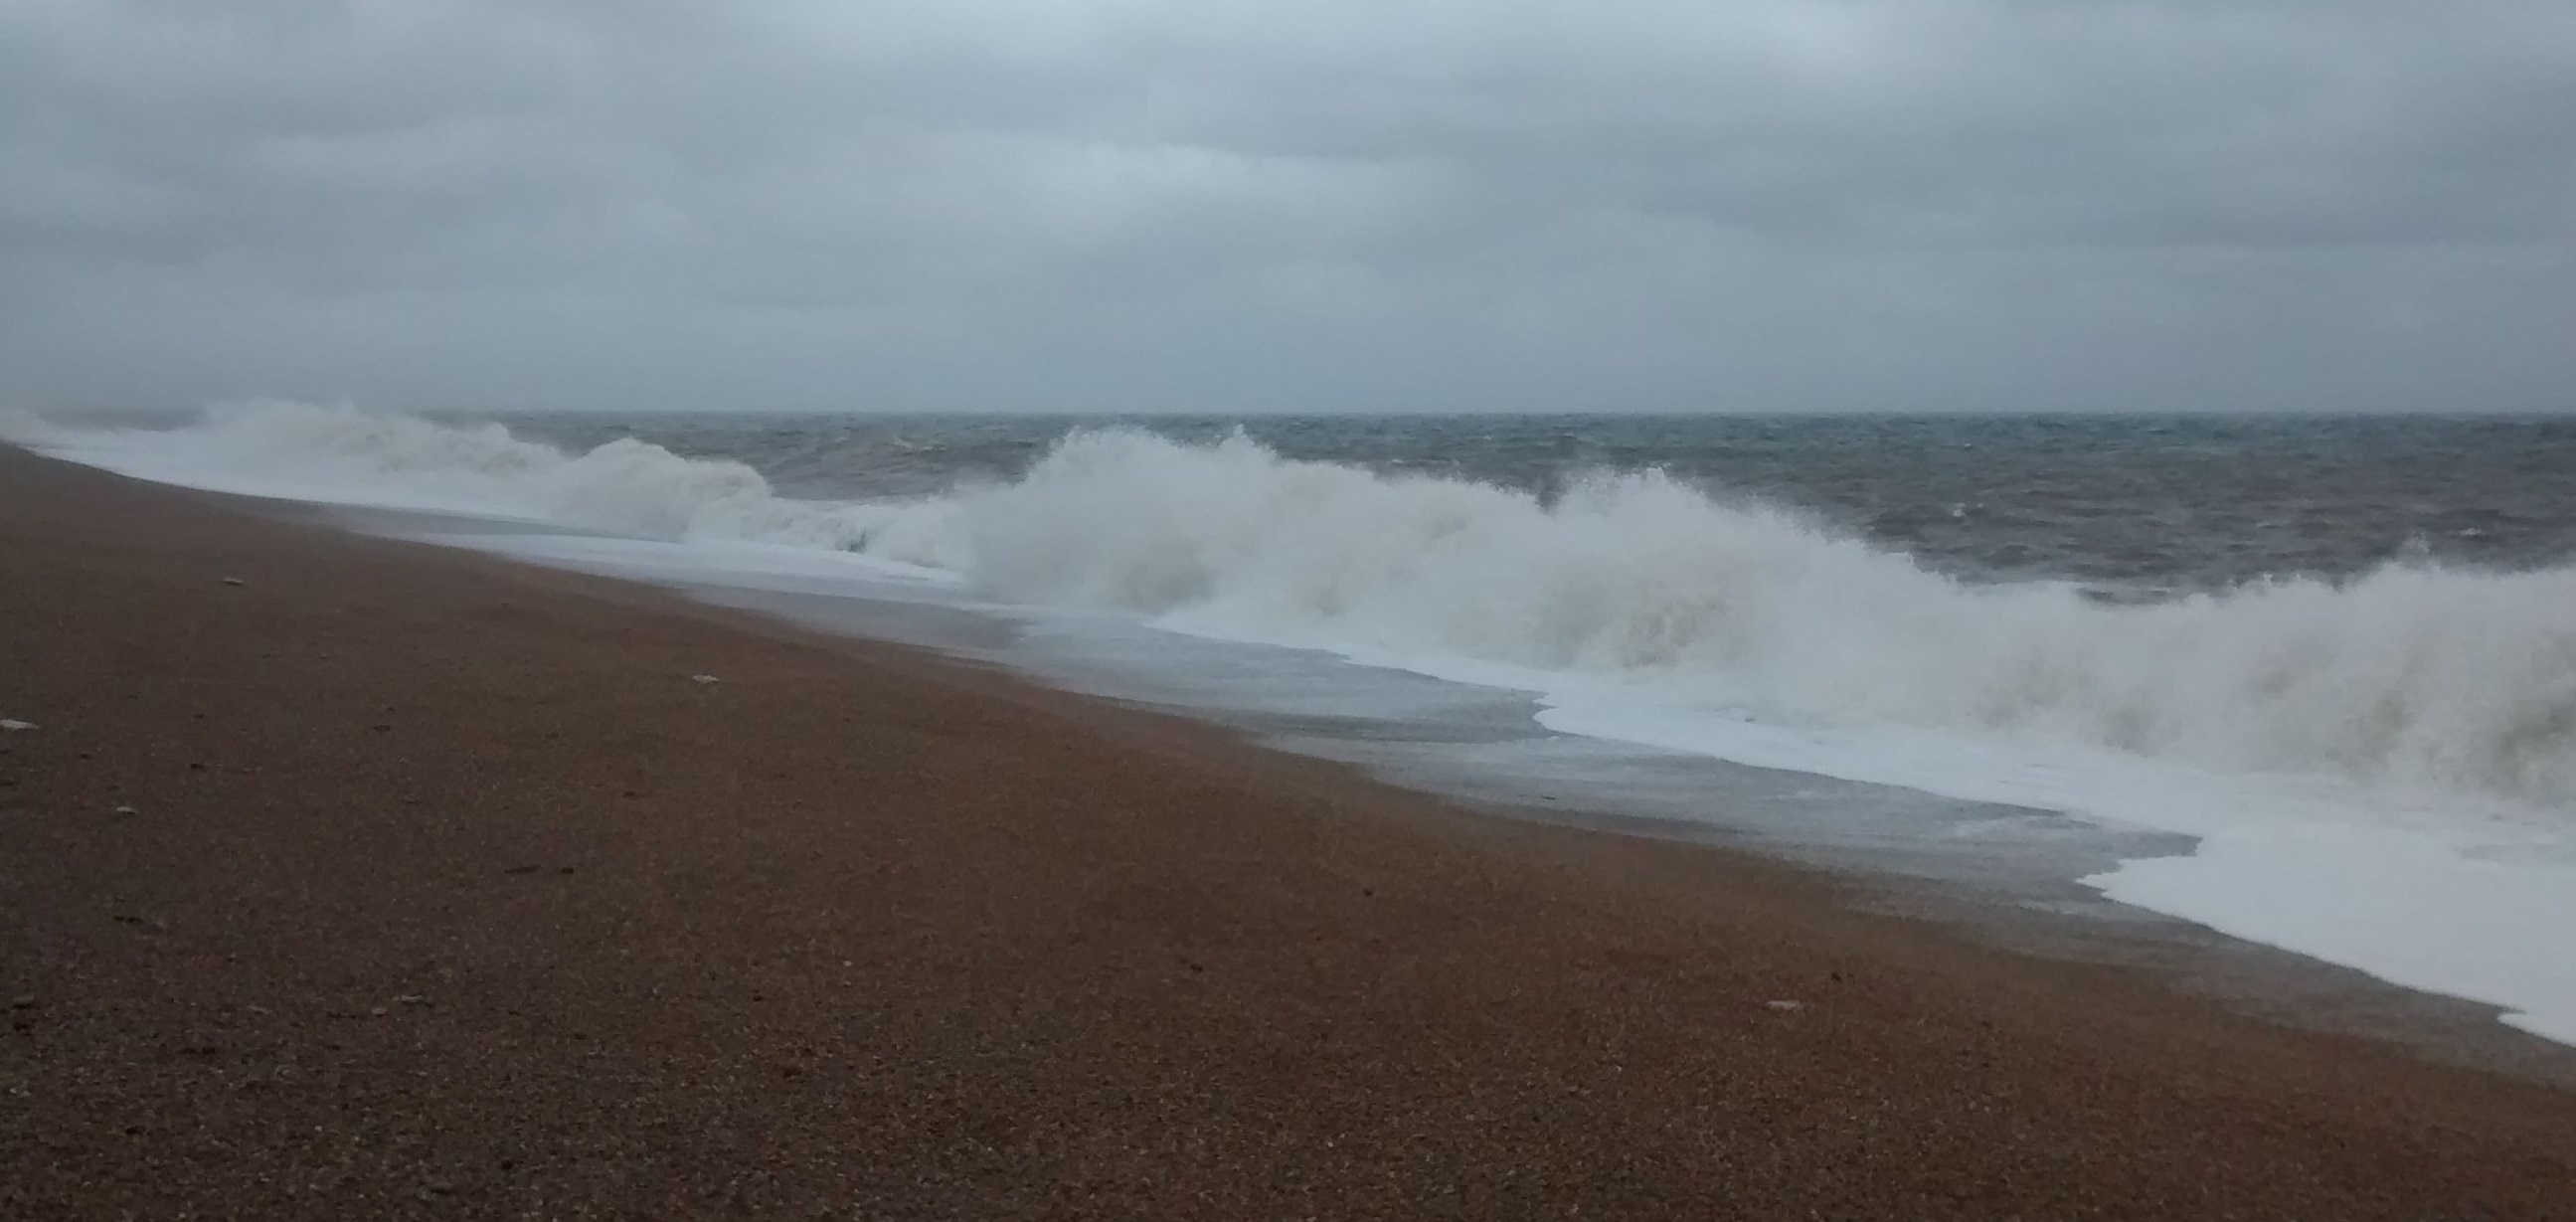 During a storm the sea pounds a pebbled beach under a cloudy sky.